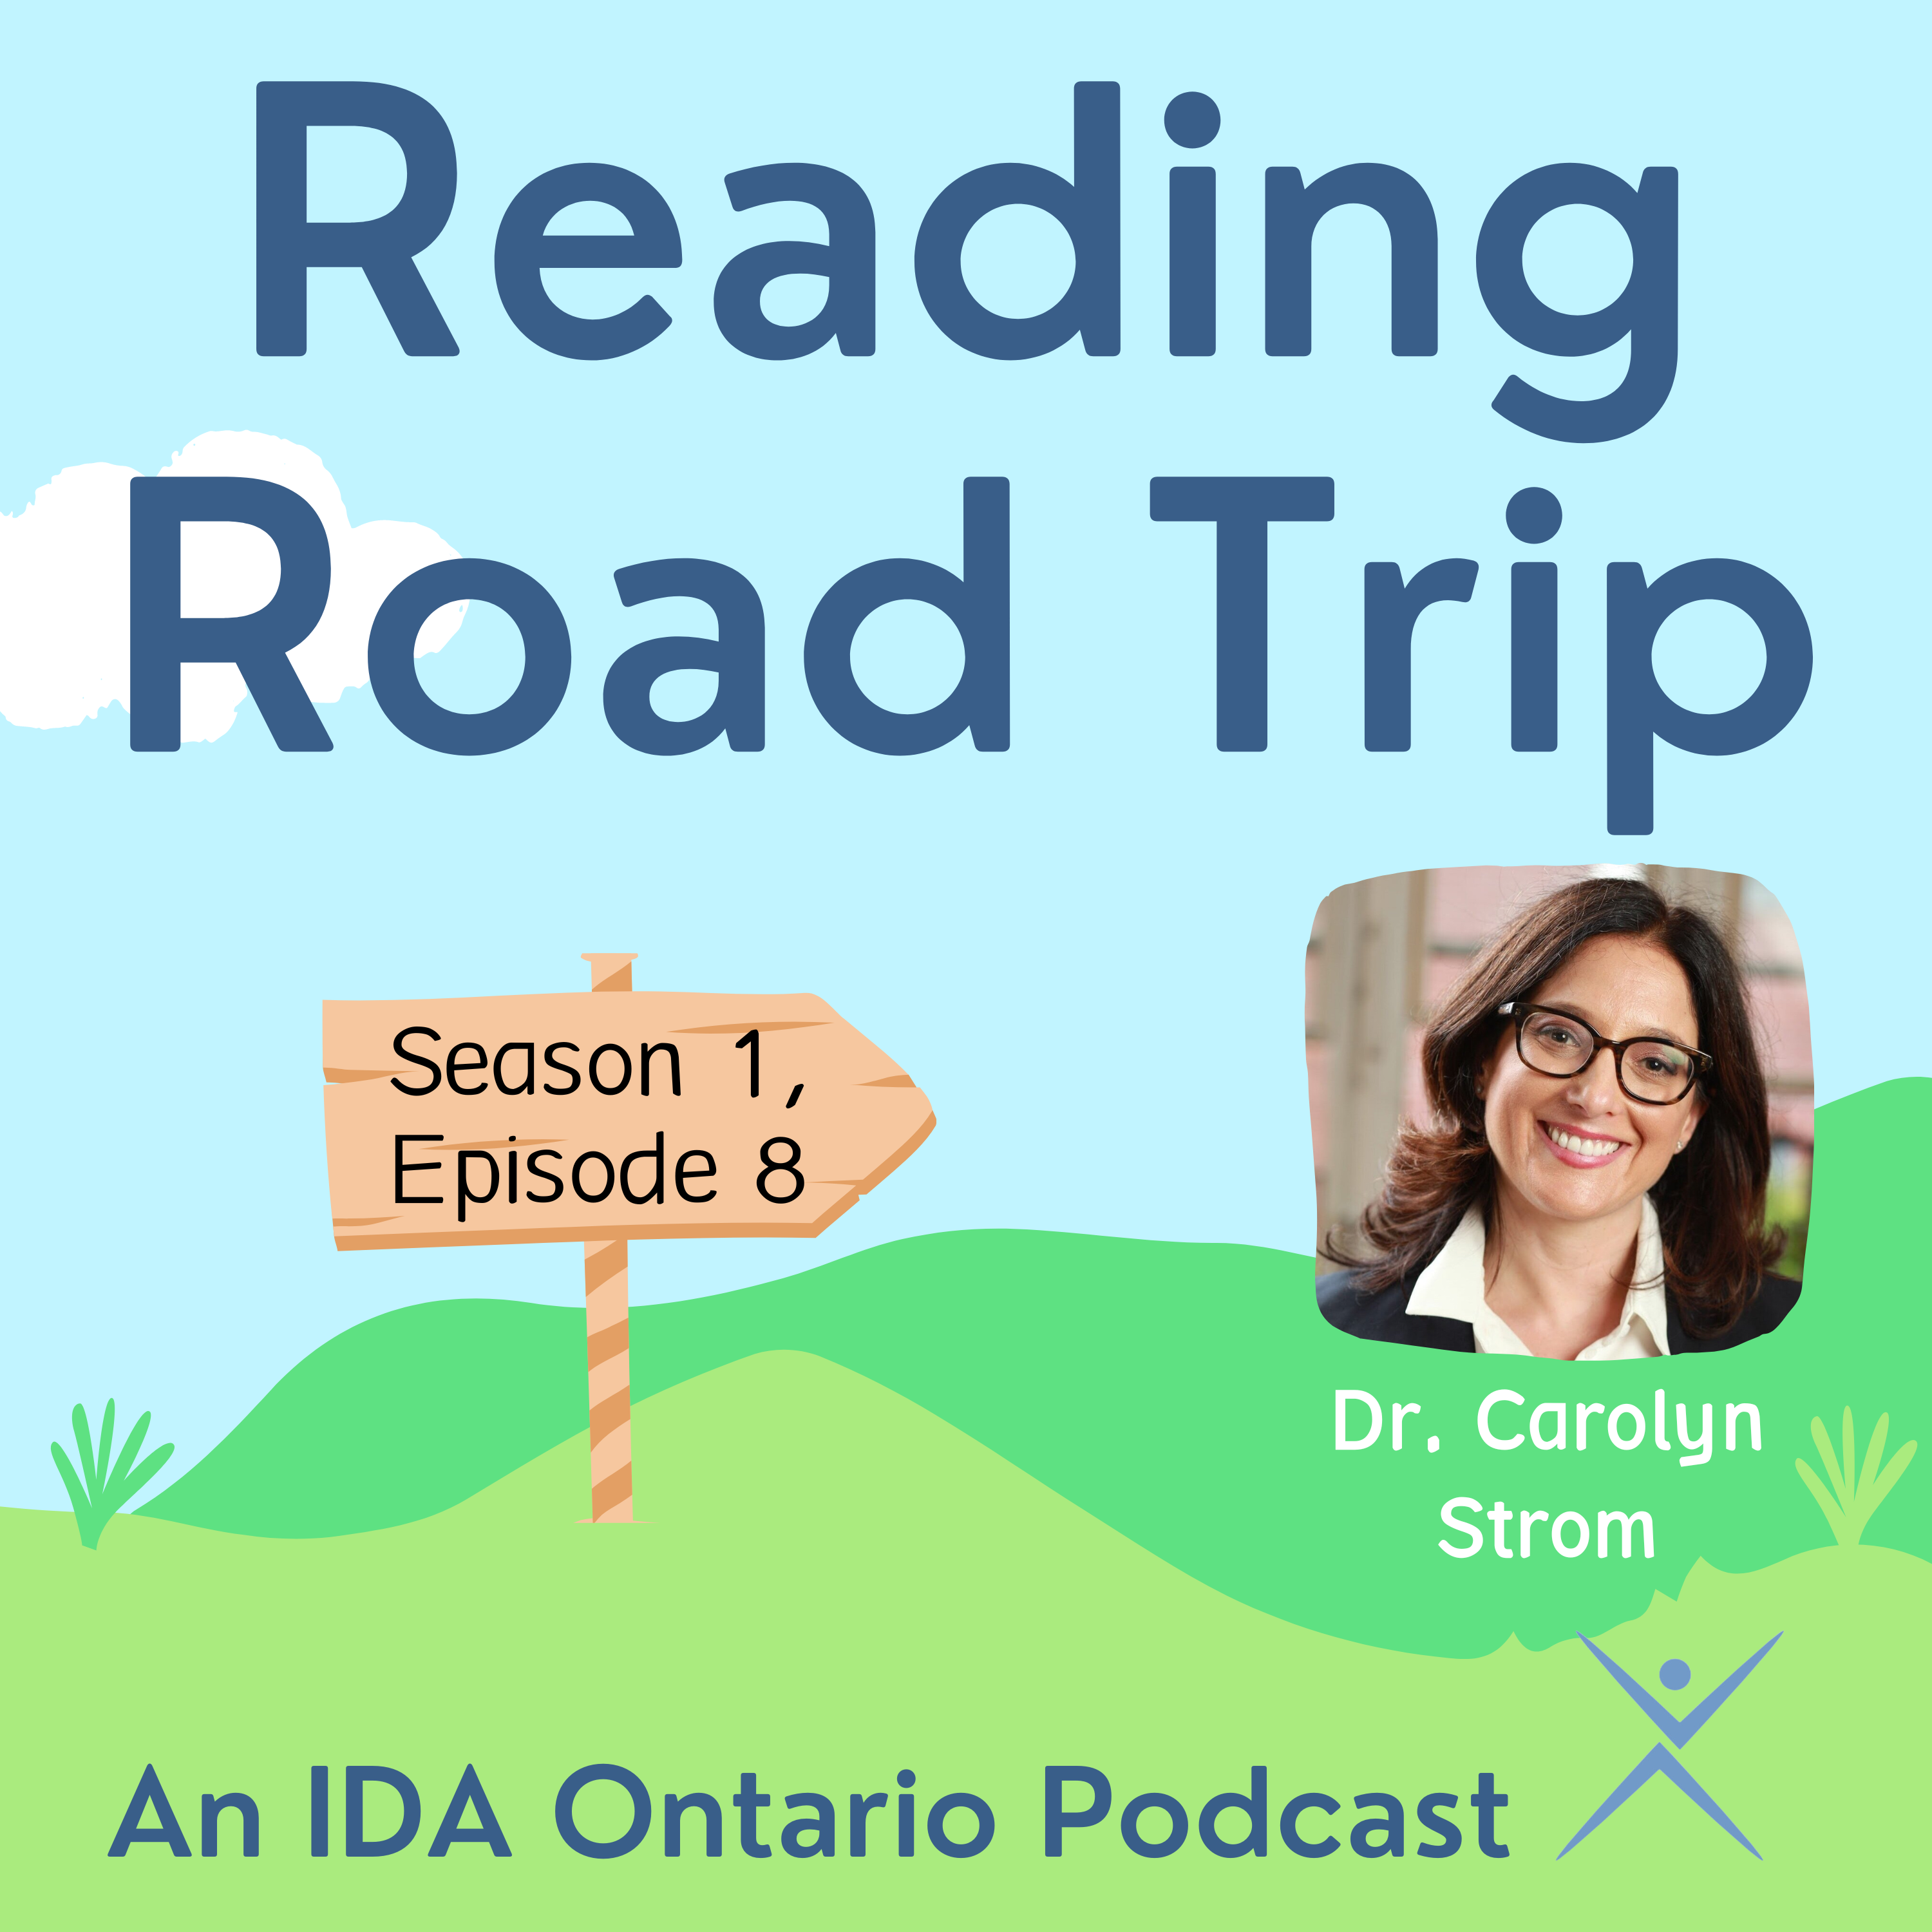 S1 E8: Inside the Reading Brain with Dr. Carolyn Strom